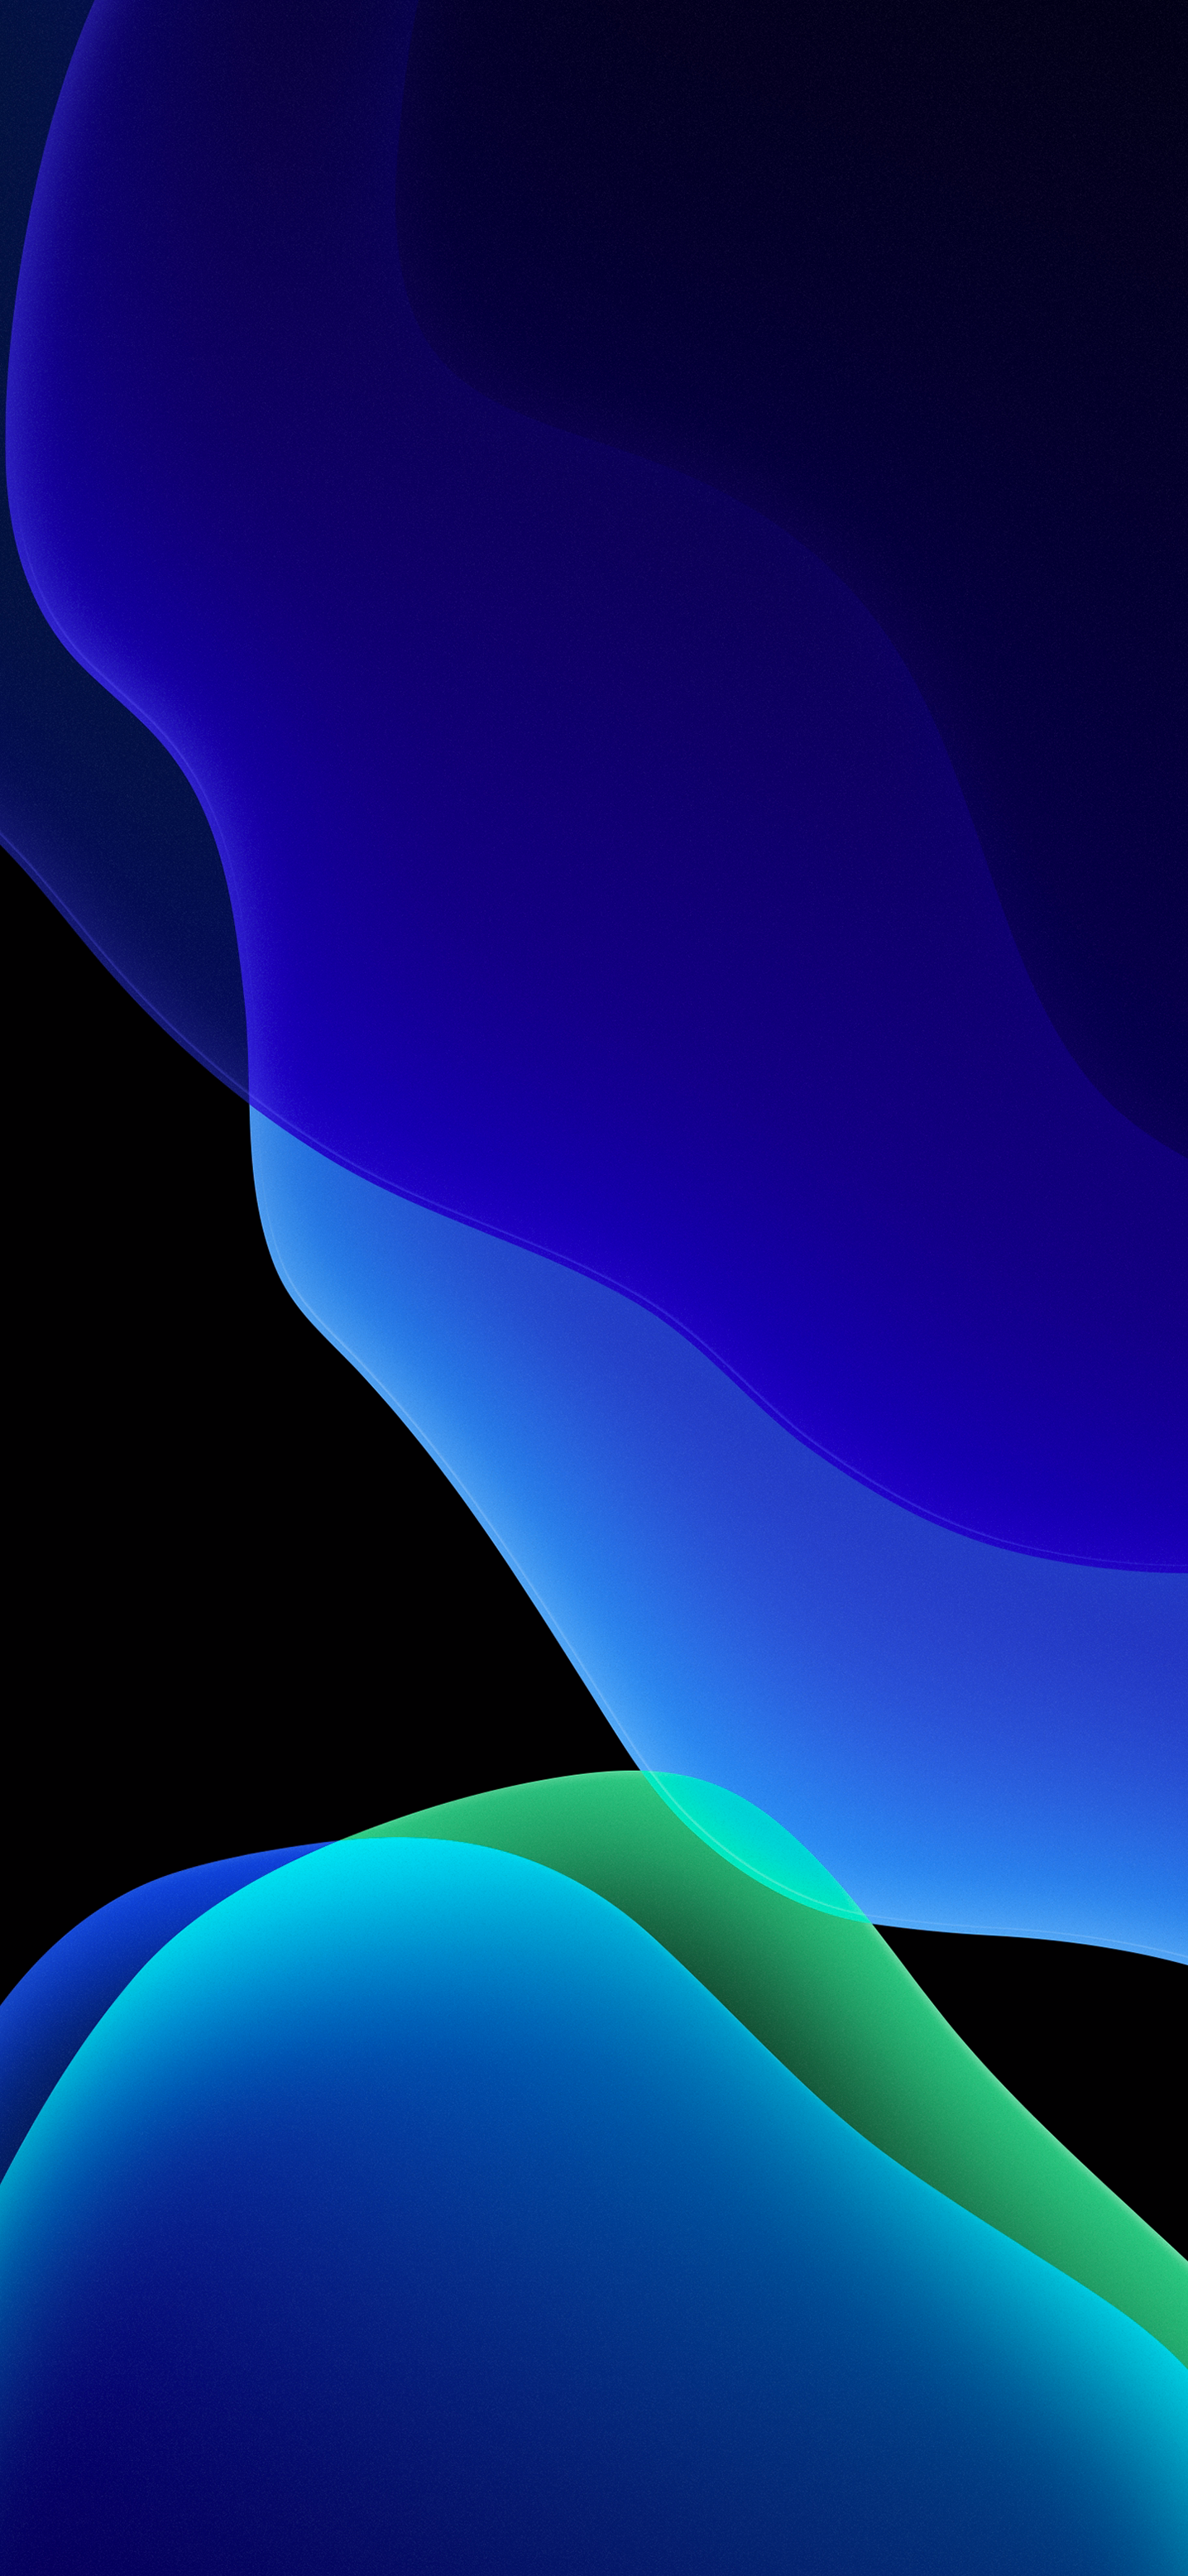 iOS 13 Official Stock Wallpaper (Ultra HD) – Blue Dark - Wallpapers Central